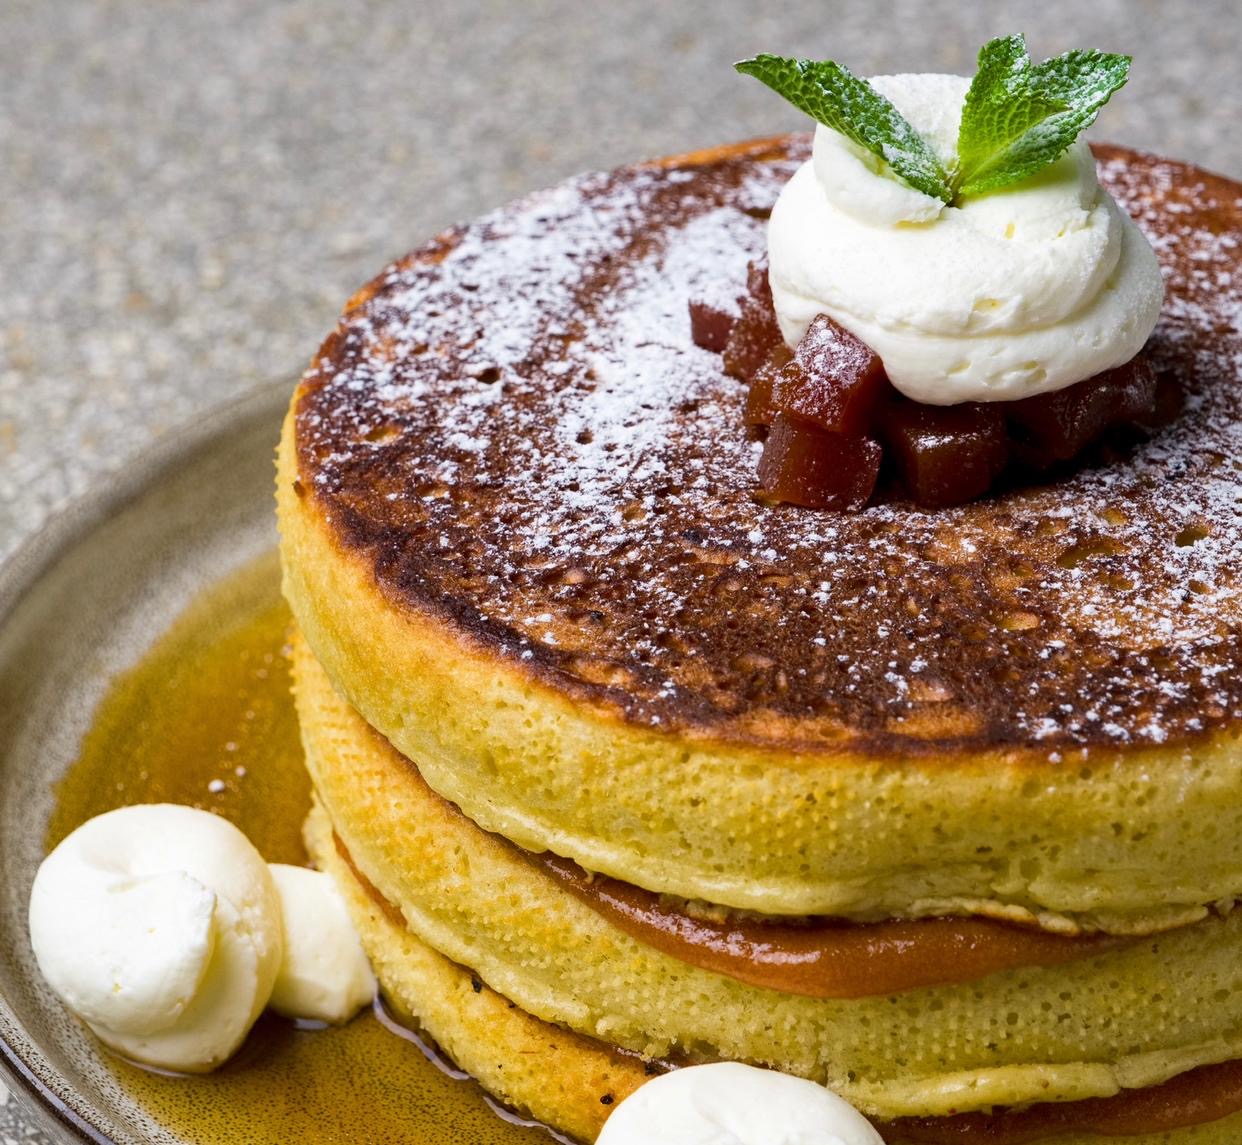 Best brunch places in Miami. Bachour in Coral Gables serves guava and cheese pancakes